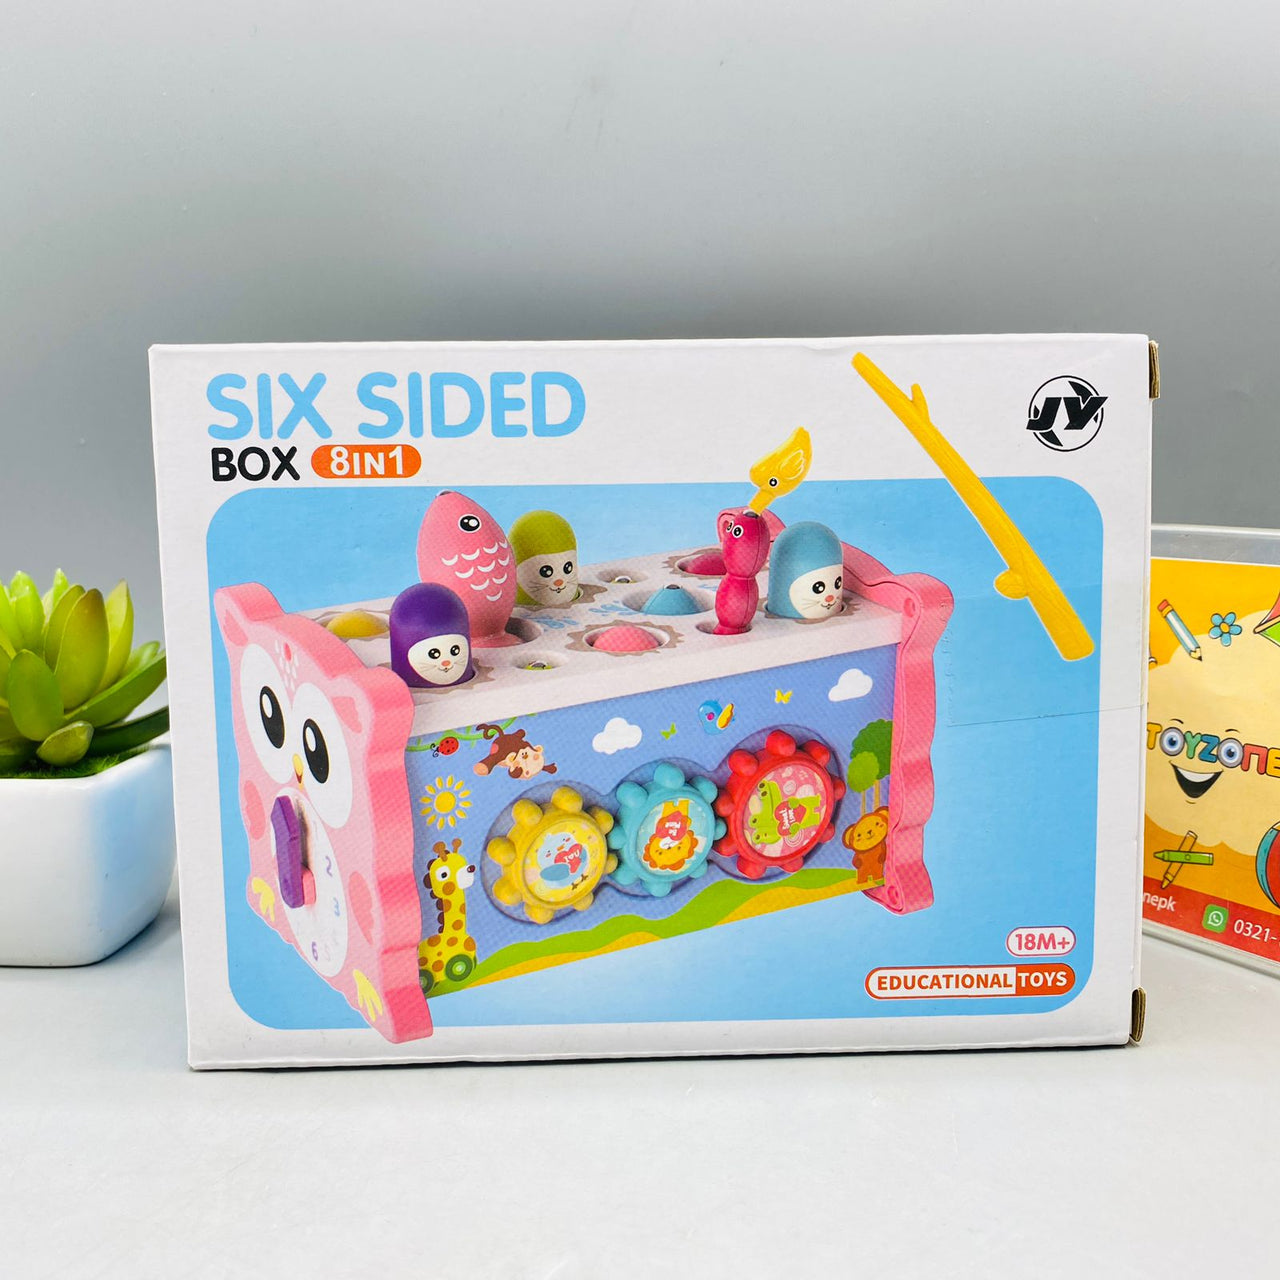 Six Sided Box 8 In 1 Learning Toy